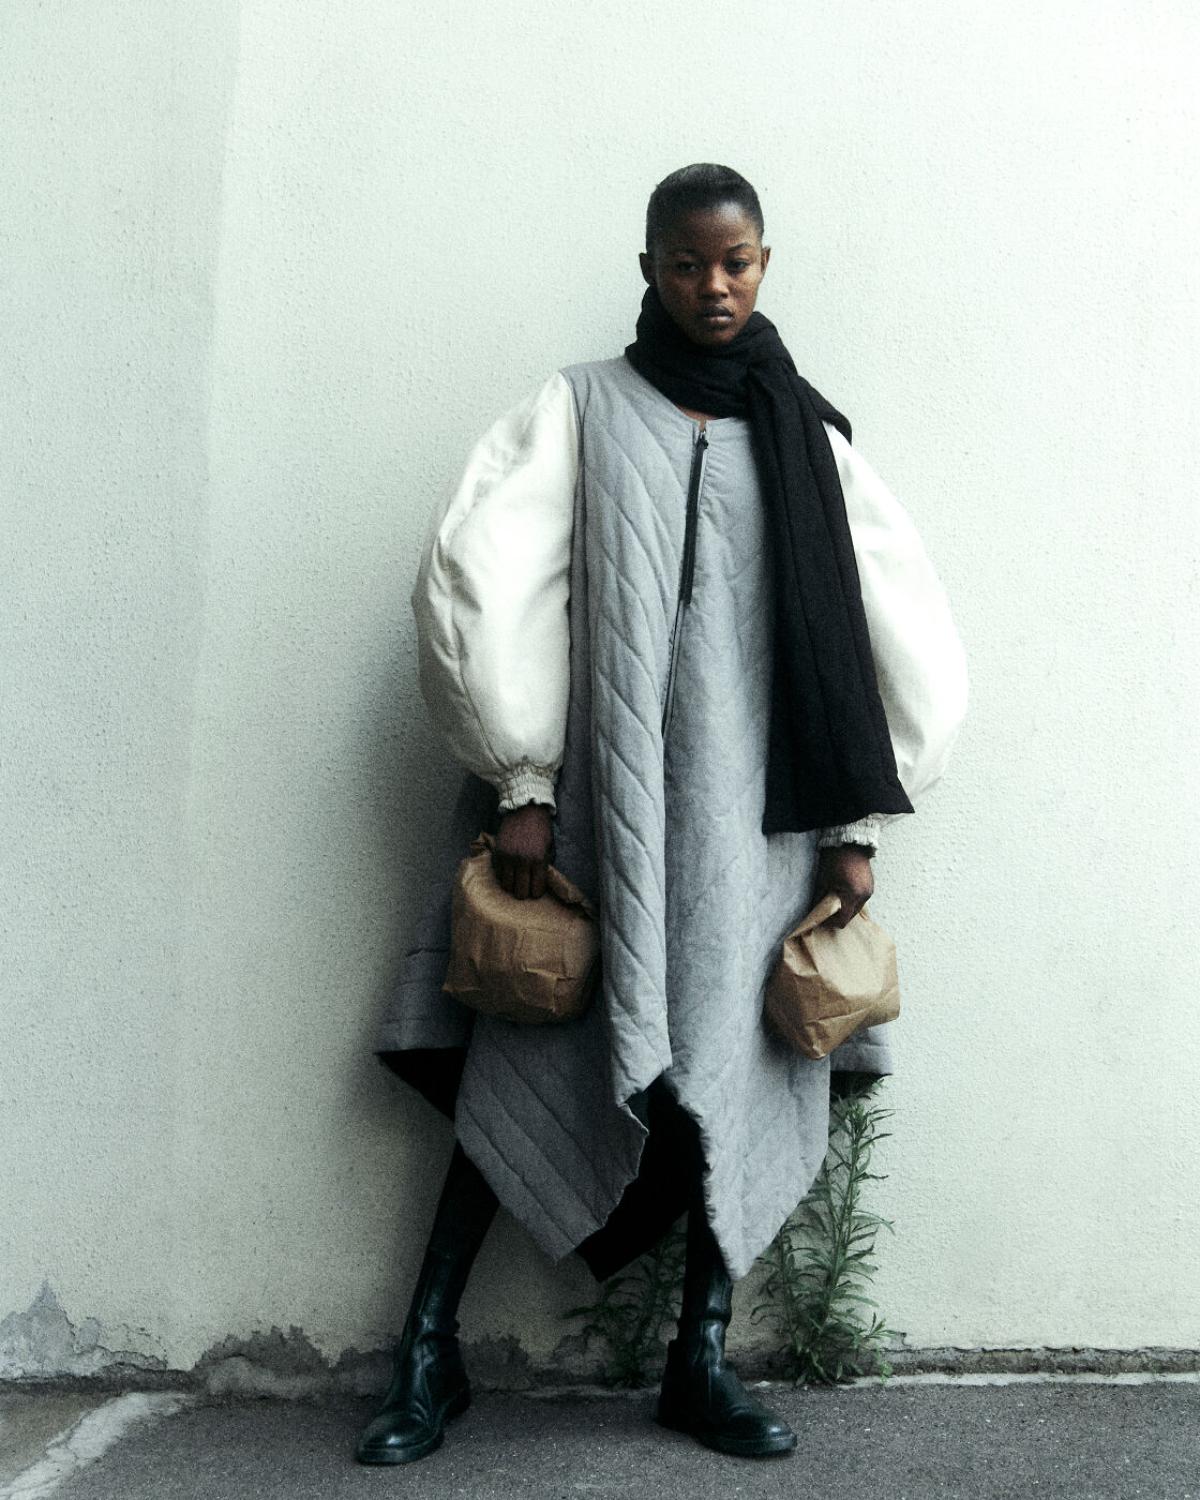 Precious Kevin by Robin Galiegue for Self Service Magazine Fall-Winter 2021. Clothing: Scarf quilted cotton-canvas coat by Loewe